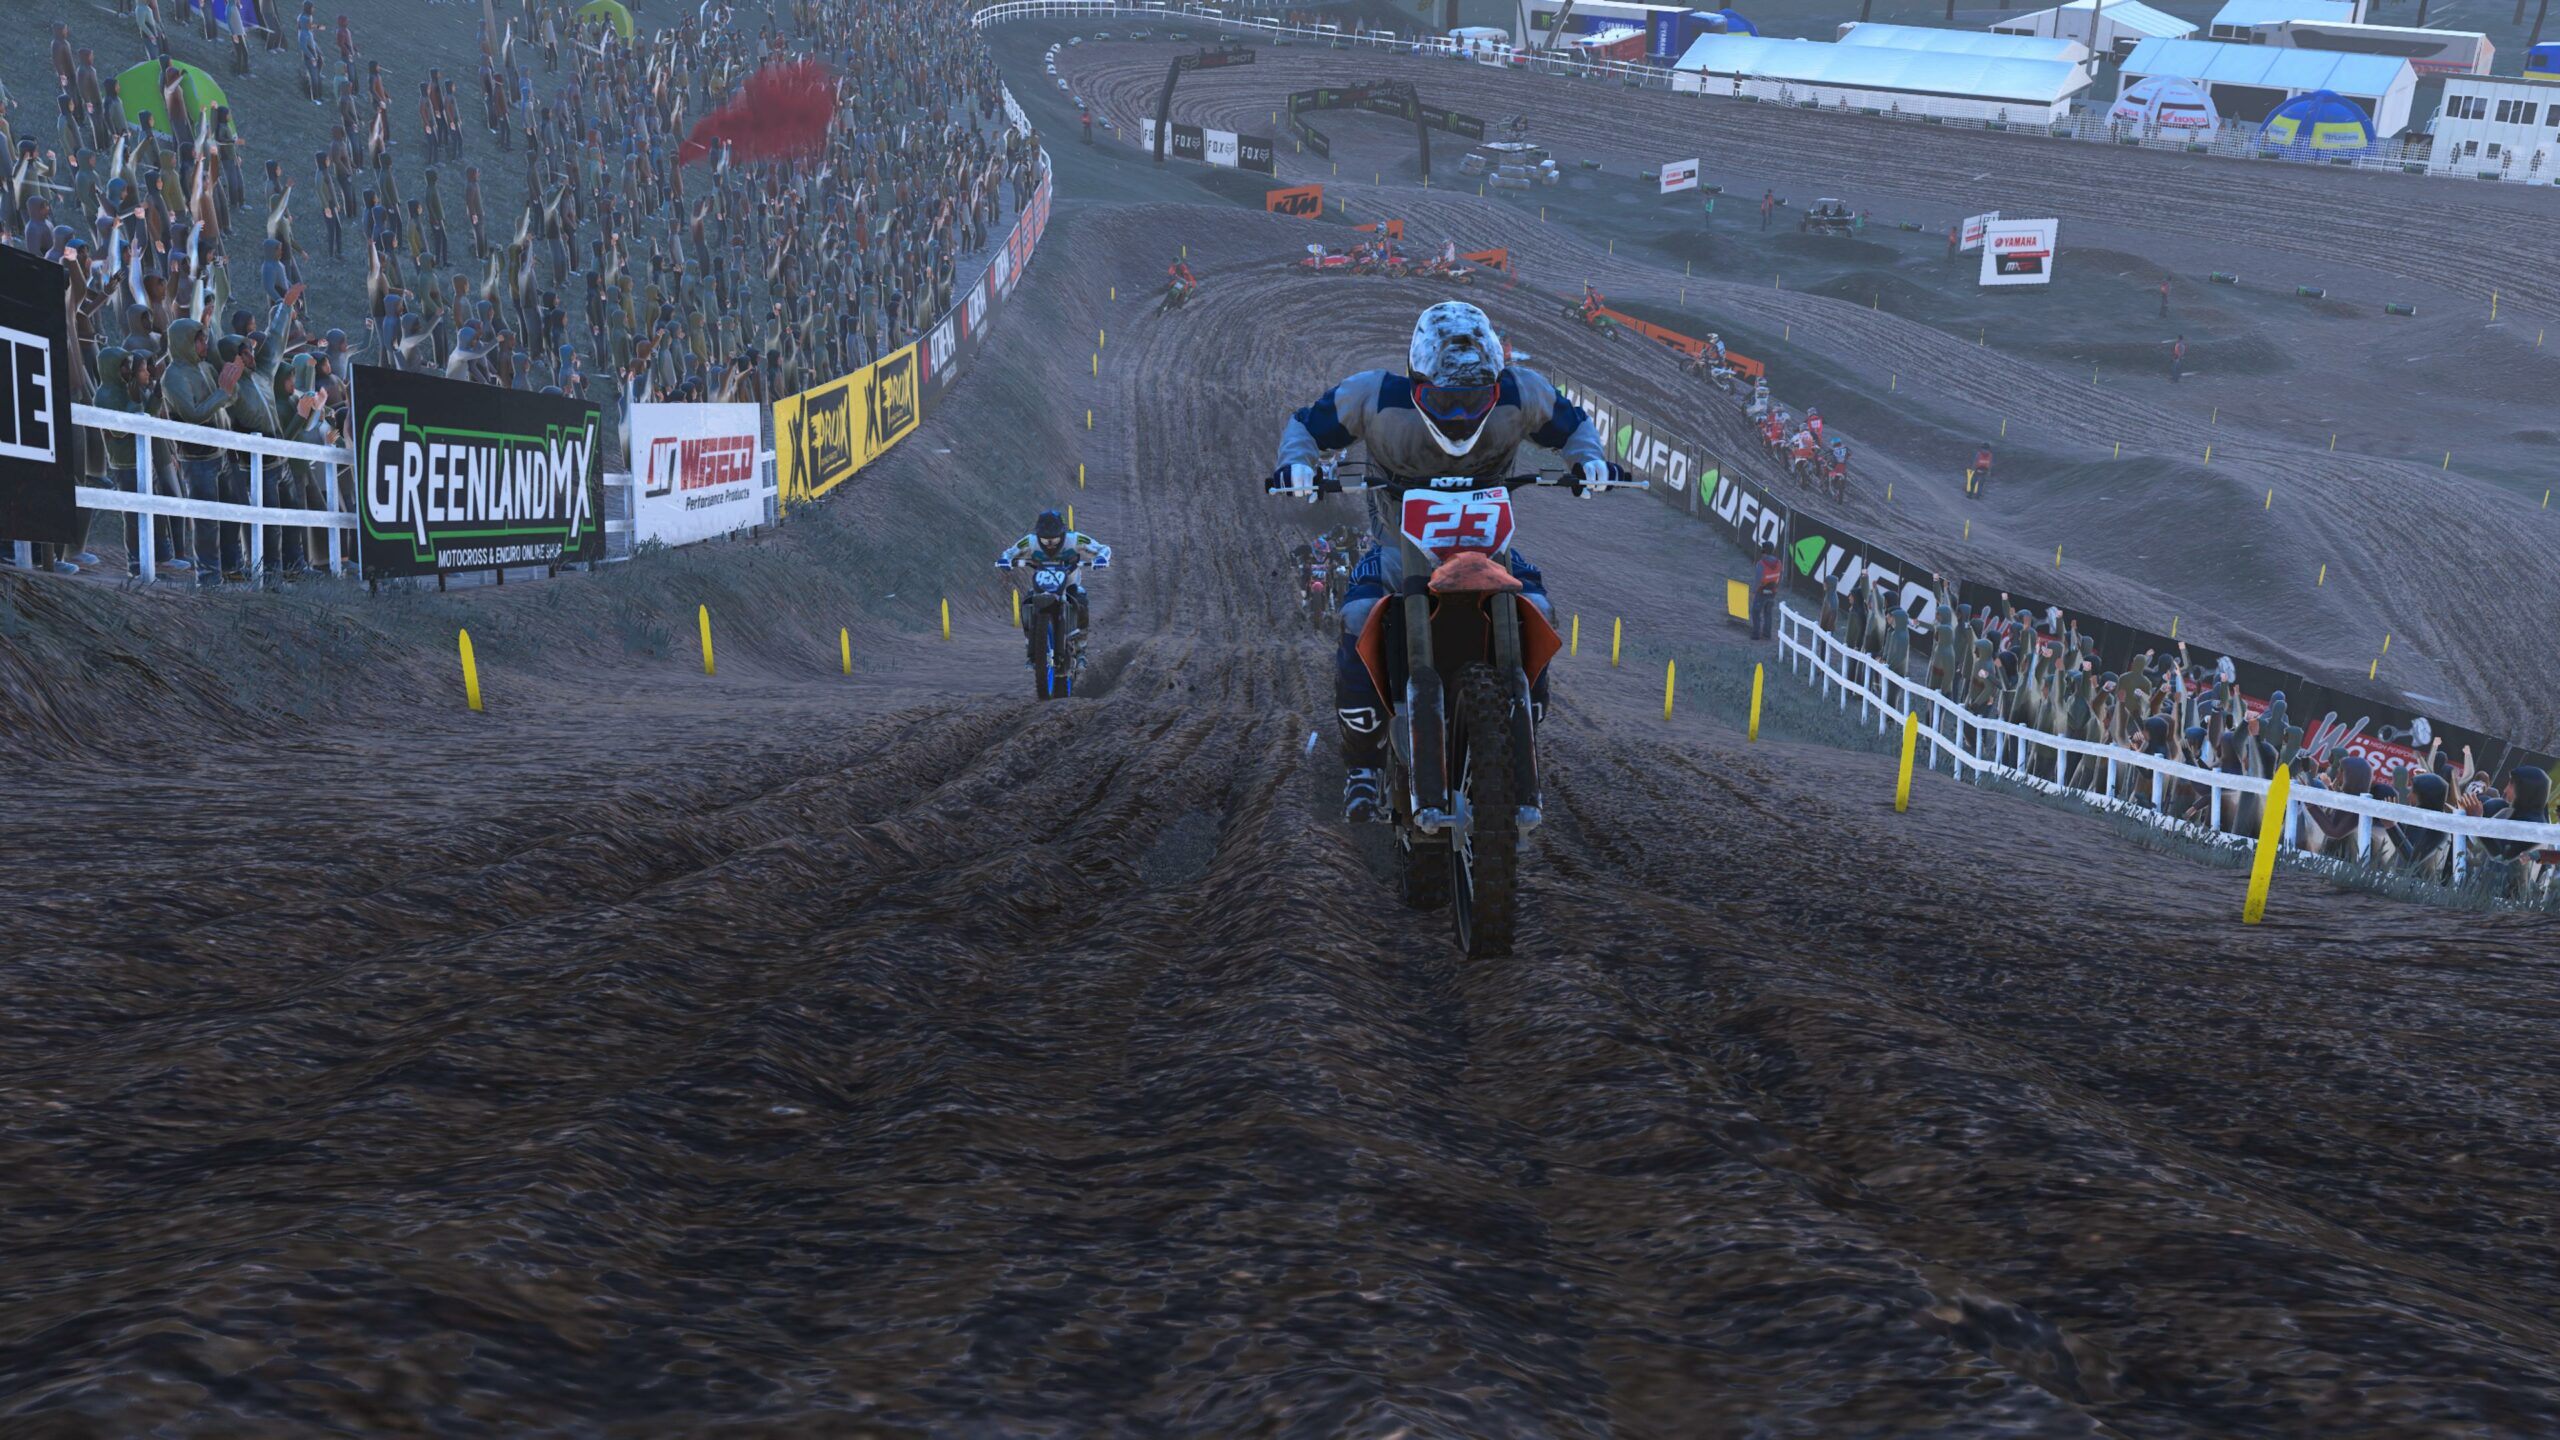 MXGP 2021 – The Official Motocross Videogame review